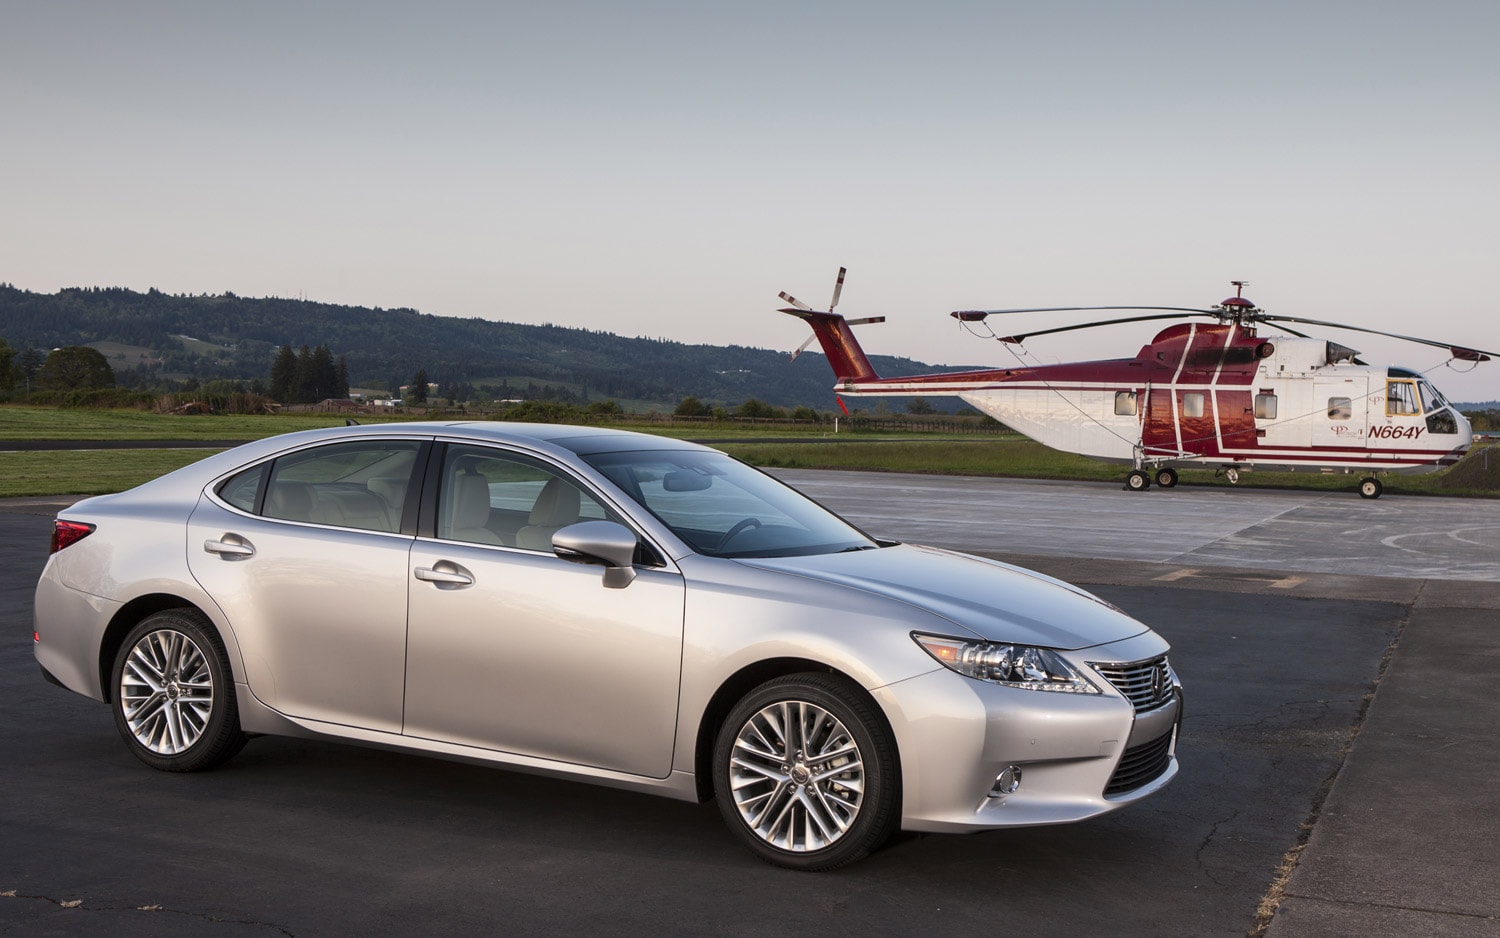 Lexus ES 350 to Become First-Ever American-Made Lexus in 2015